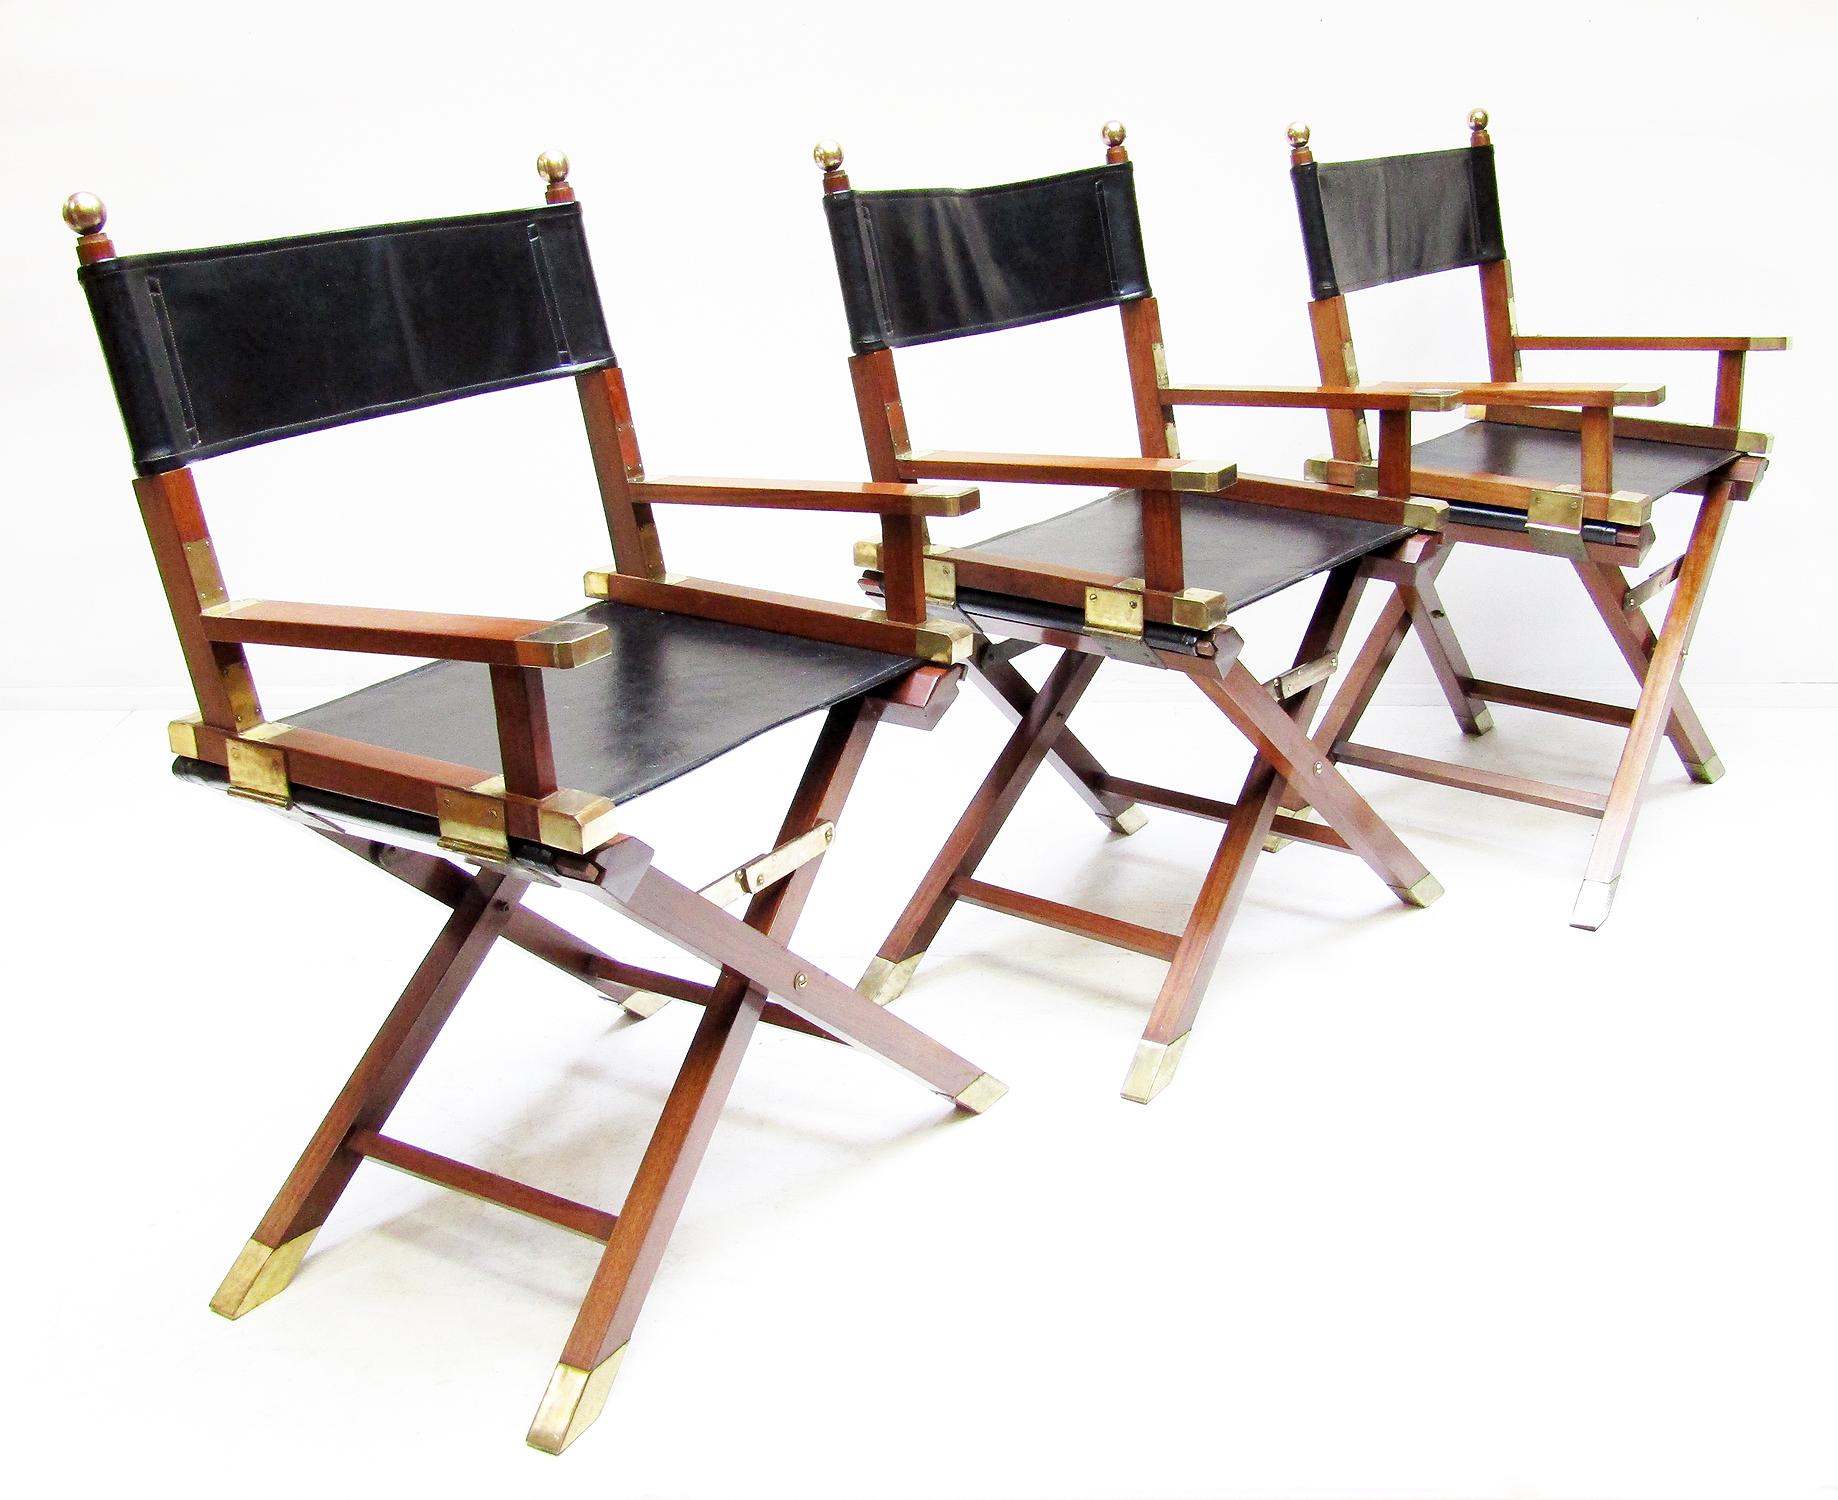 A group of three 1960s campaign chairs by renowned Hong Kong-based designer and dealer Charlotte Horstmann.

In mahogany and leather with lavish brass detail, these chairs evoke colonial era luxury.

They are in excellent structural and